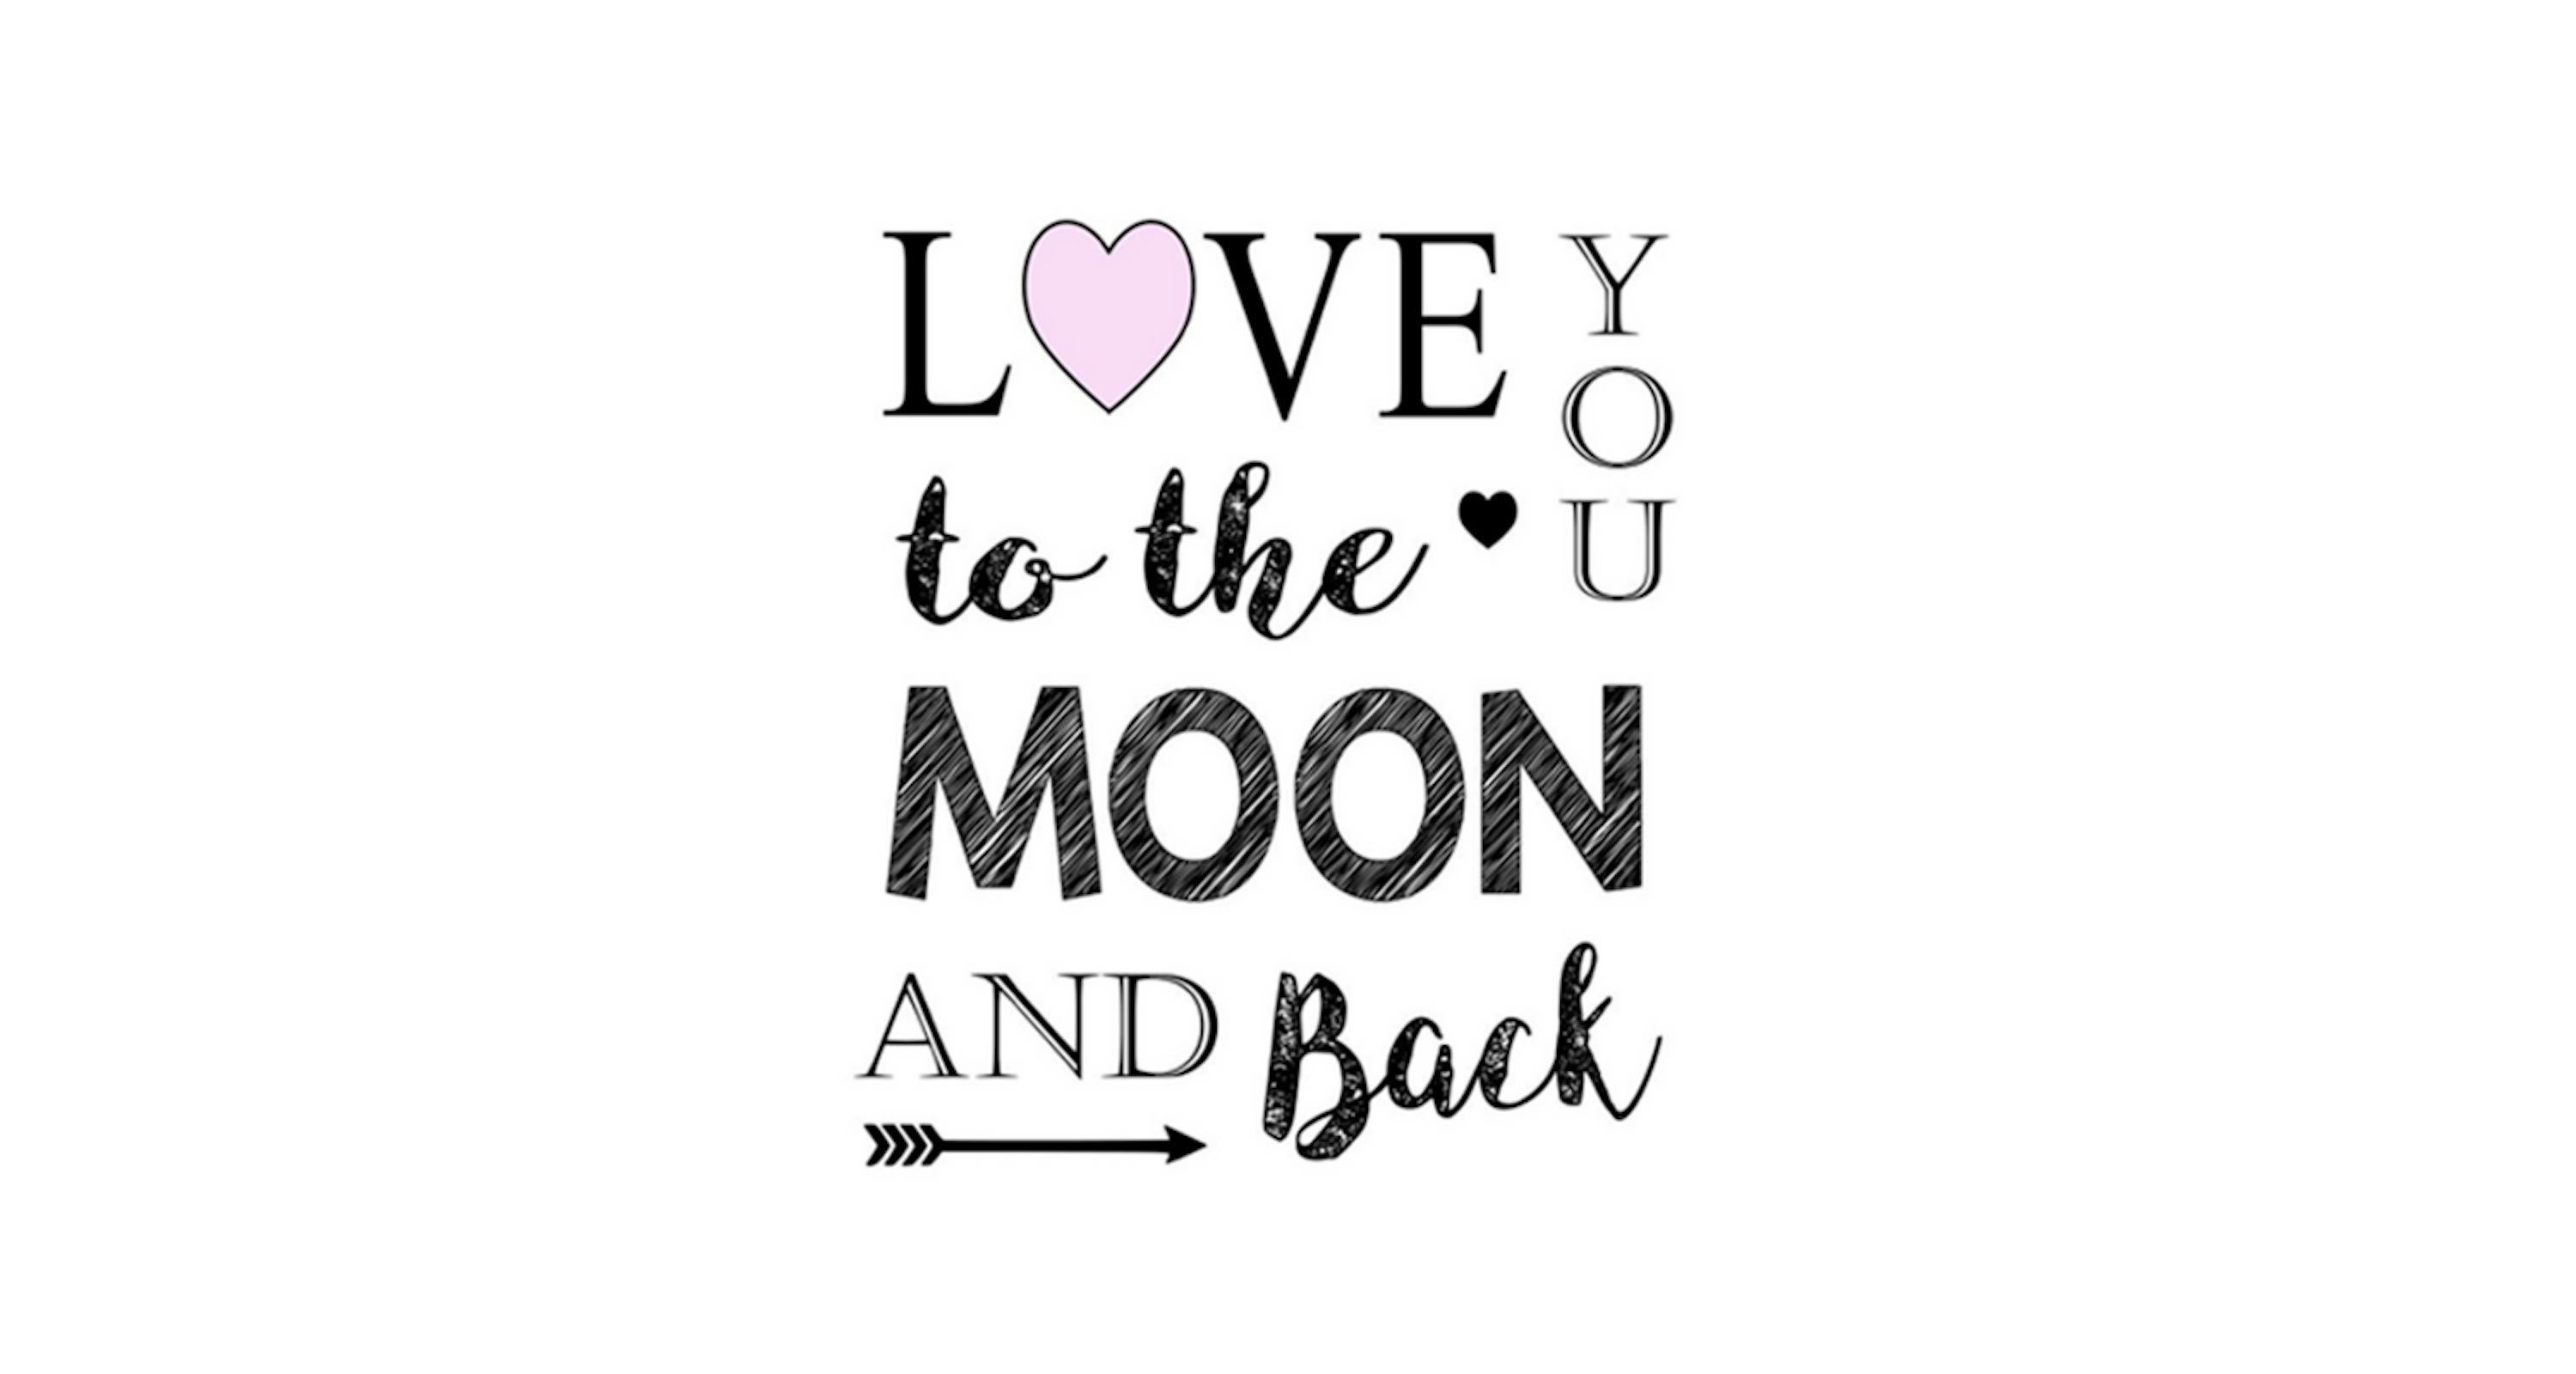 love-you-to-the-moon-and-back-valentine-s-day-printable-south-lumina-style